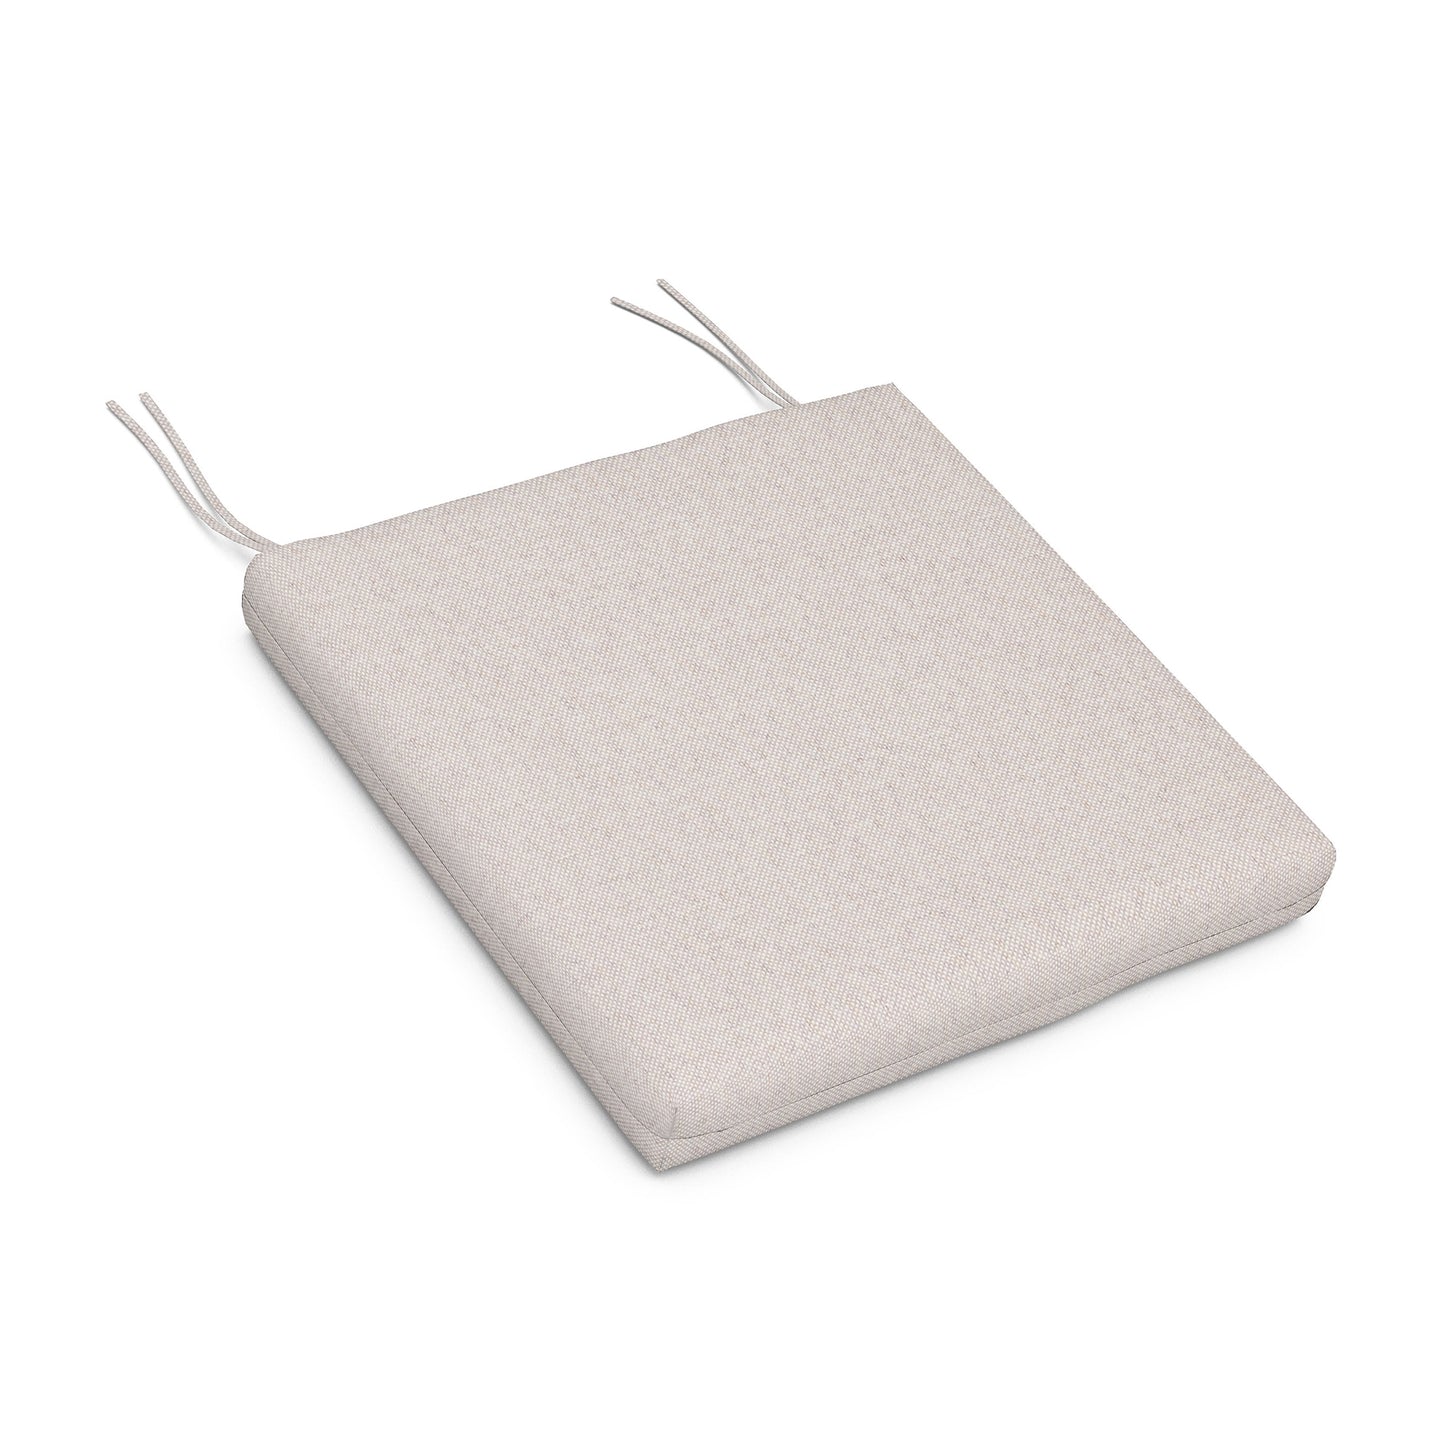 A light gray POLYWOOD® XPWS0008 - Seat Cushion with two visible tie strings on a plain white background.